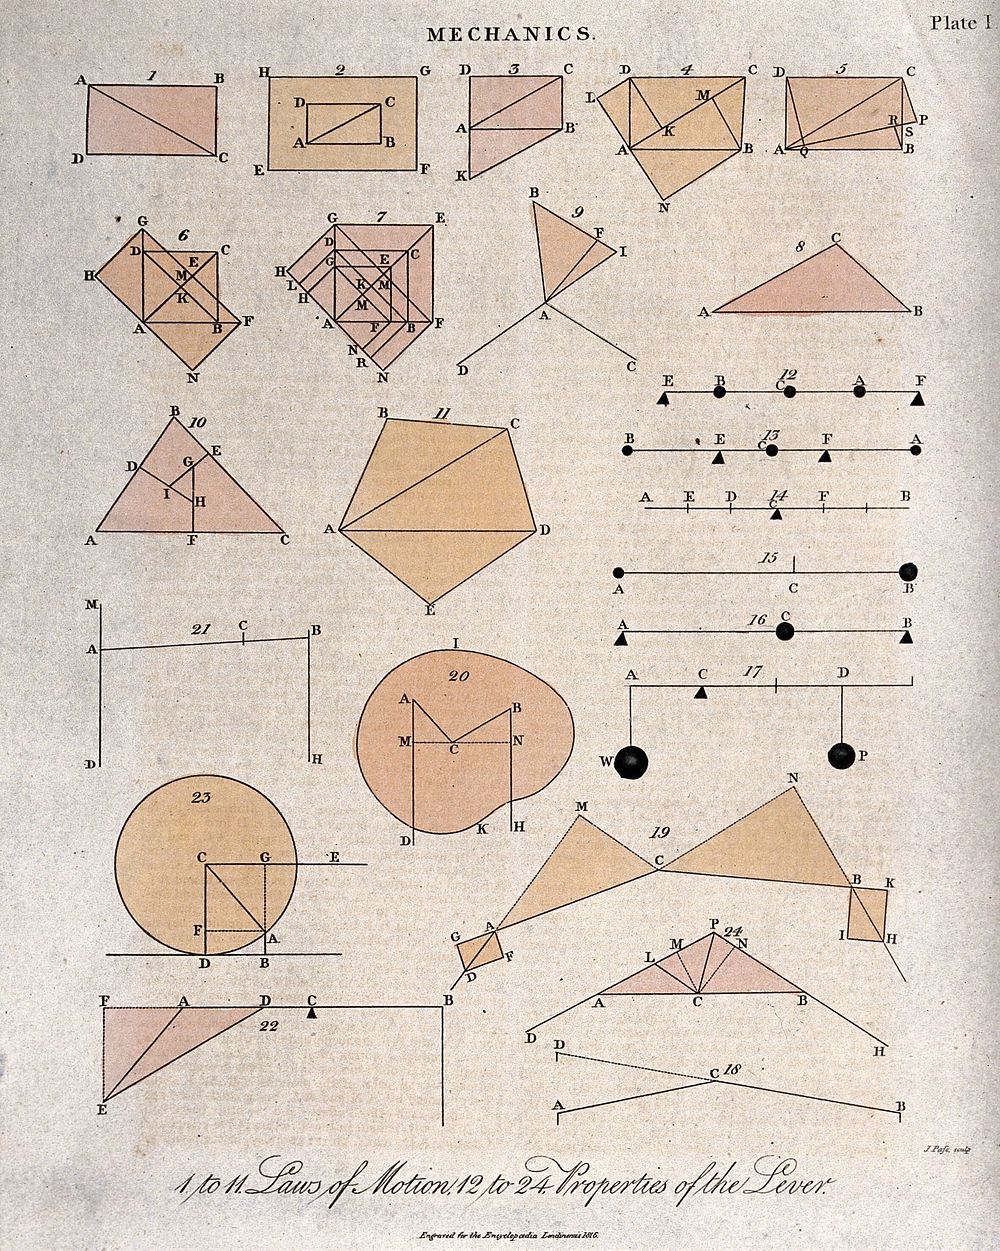 Mechanics: diagrams of forces, statics and dynamics. Coloured engraving by J. Pass.